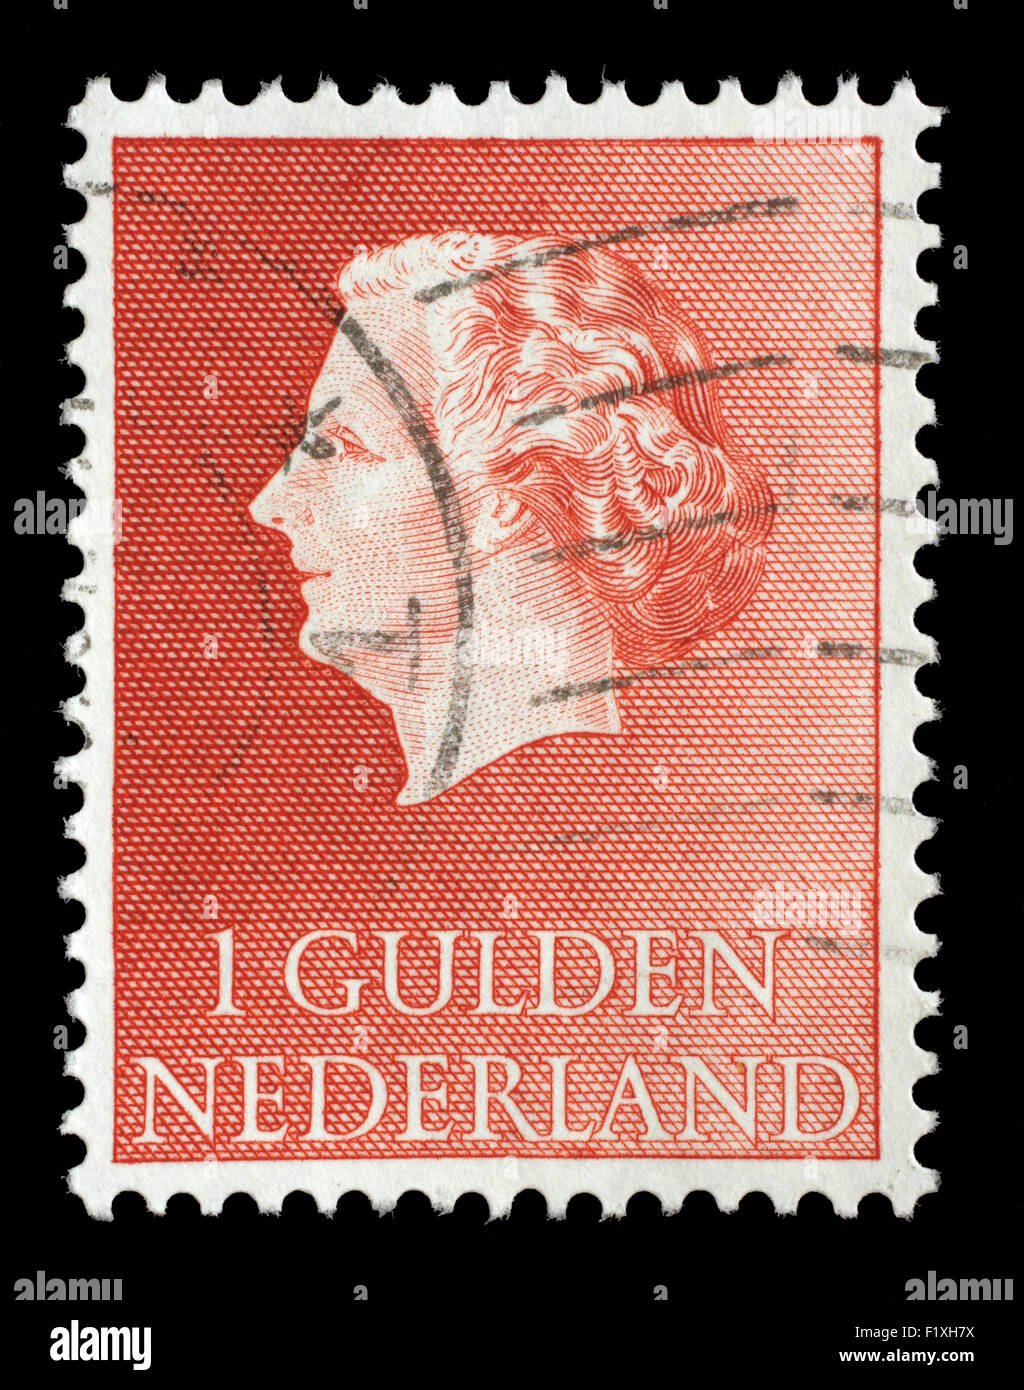 Stamp printed in Netherlands shows portrait of Queen Juliana. Was Queen of Netherlands in the period 1948 to 1980. Stock Photo